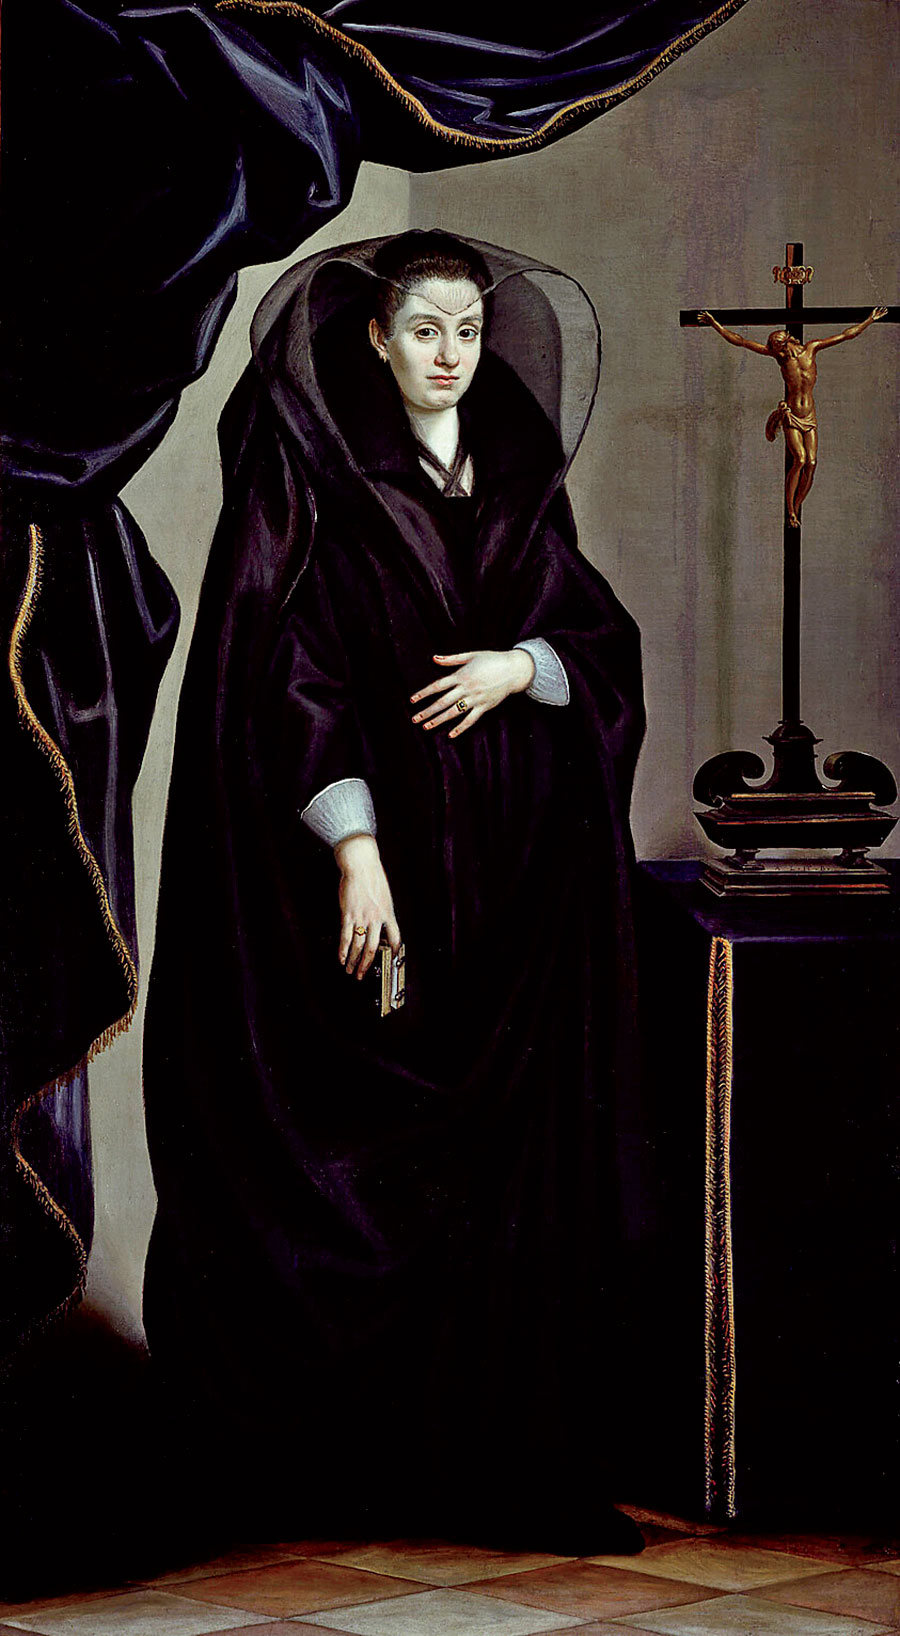 Jacopo da Empoli’s ‘Portrait of a Noblewoman Dressed in Mourning’